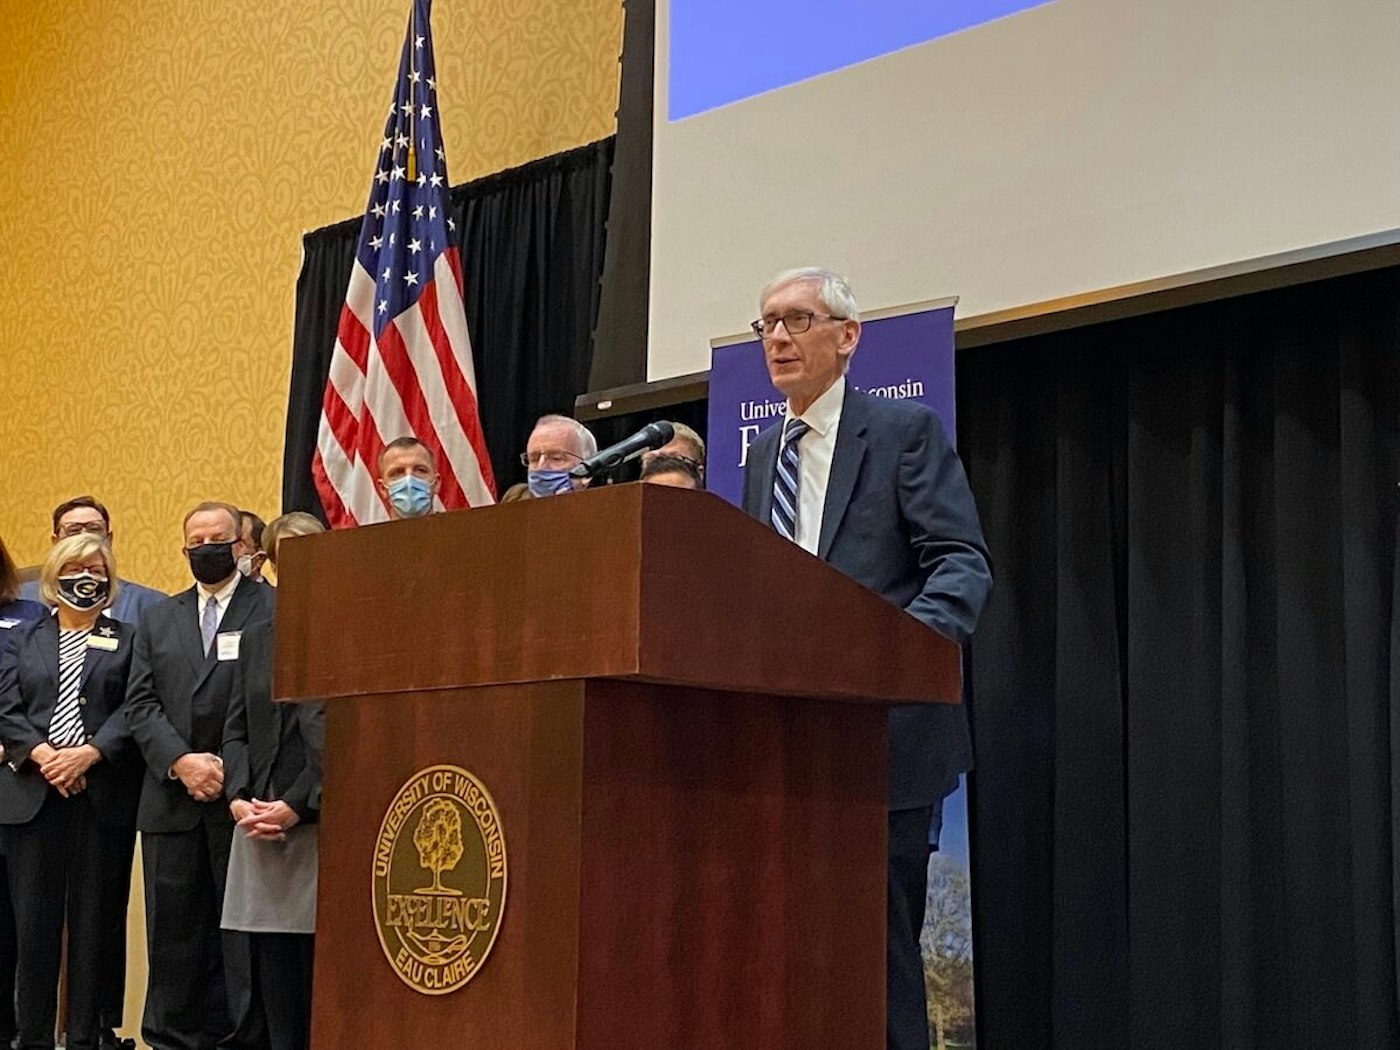 Gov. Tony Evers announces $59.5 million in grant funds for 12 projects in Wisconsin to address the state's workforce challenges. The announcement occurred at UW-Eau Claire, which will receive $9.4 million to address worker shortages in health care, education, and social services. (Photo by Julian Emerson)